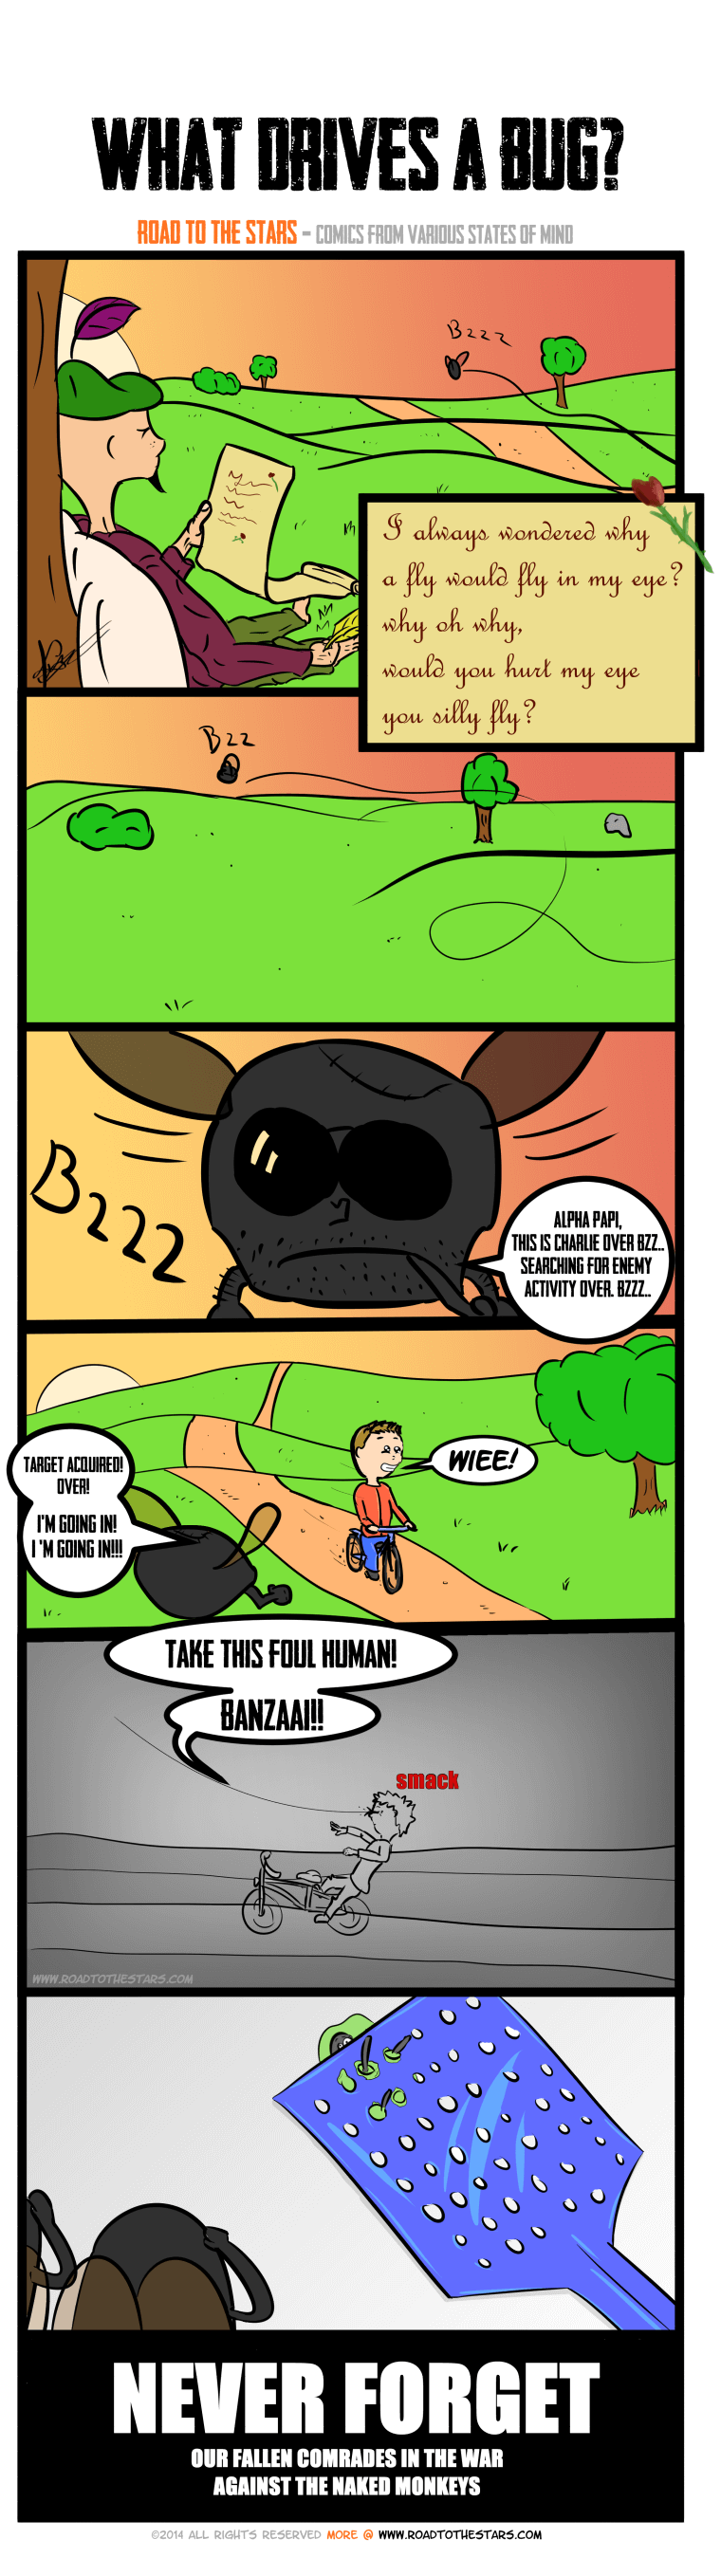 A bug's perspective